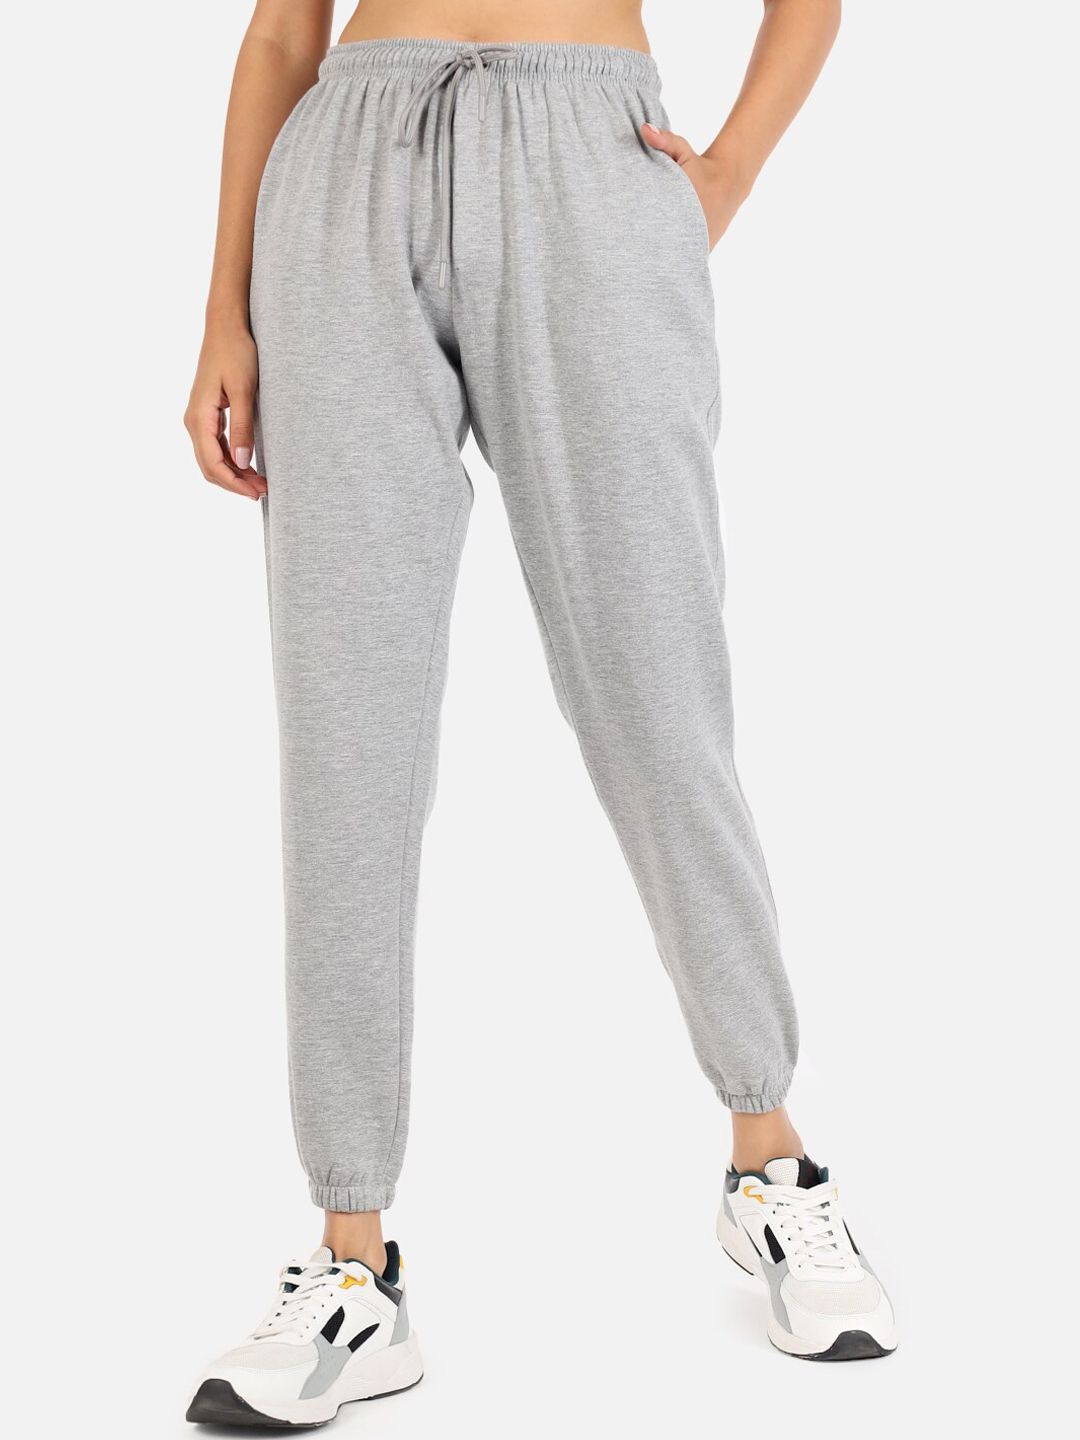 GRIFFEL Women Grey Solid Cotton Sports Joggers Price in India